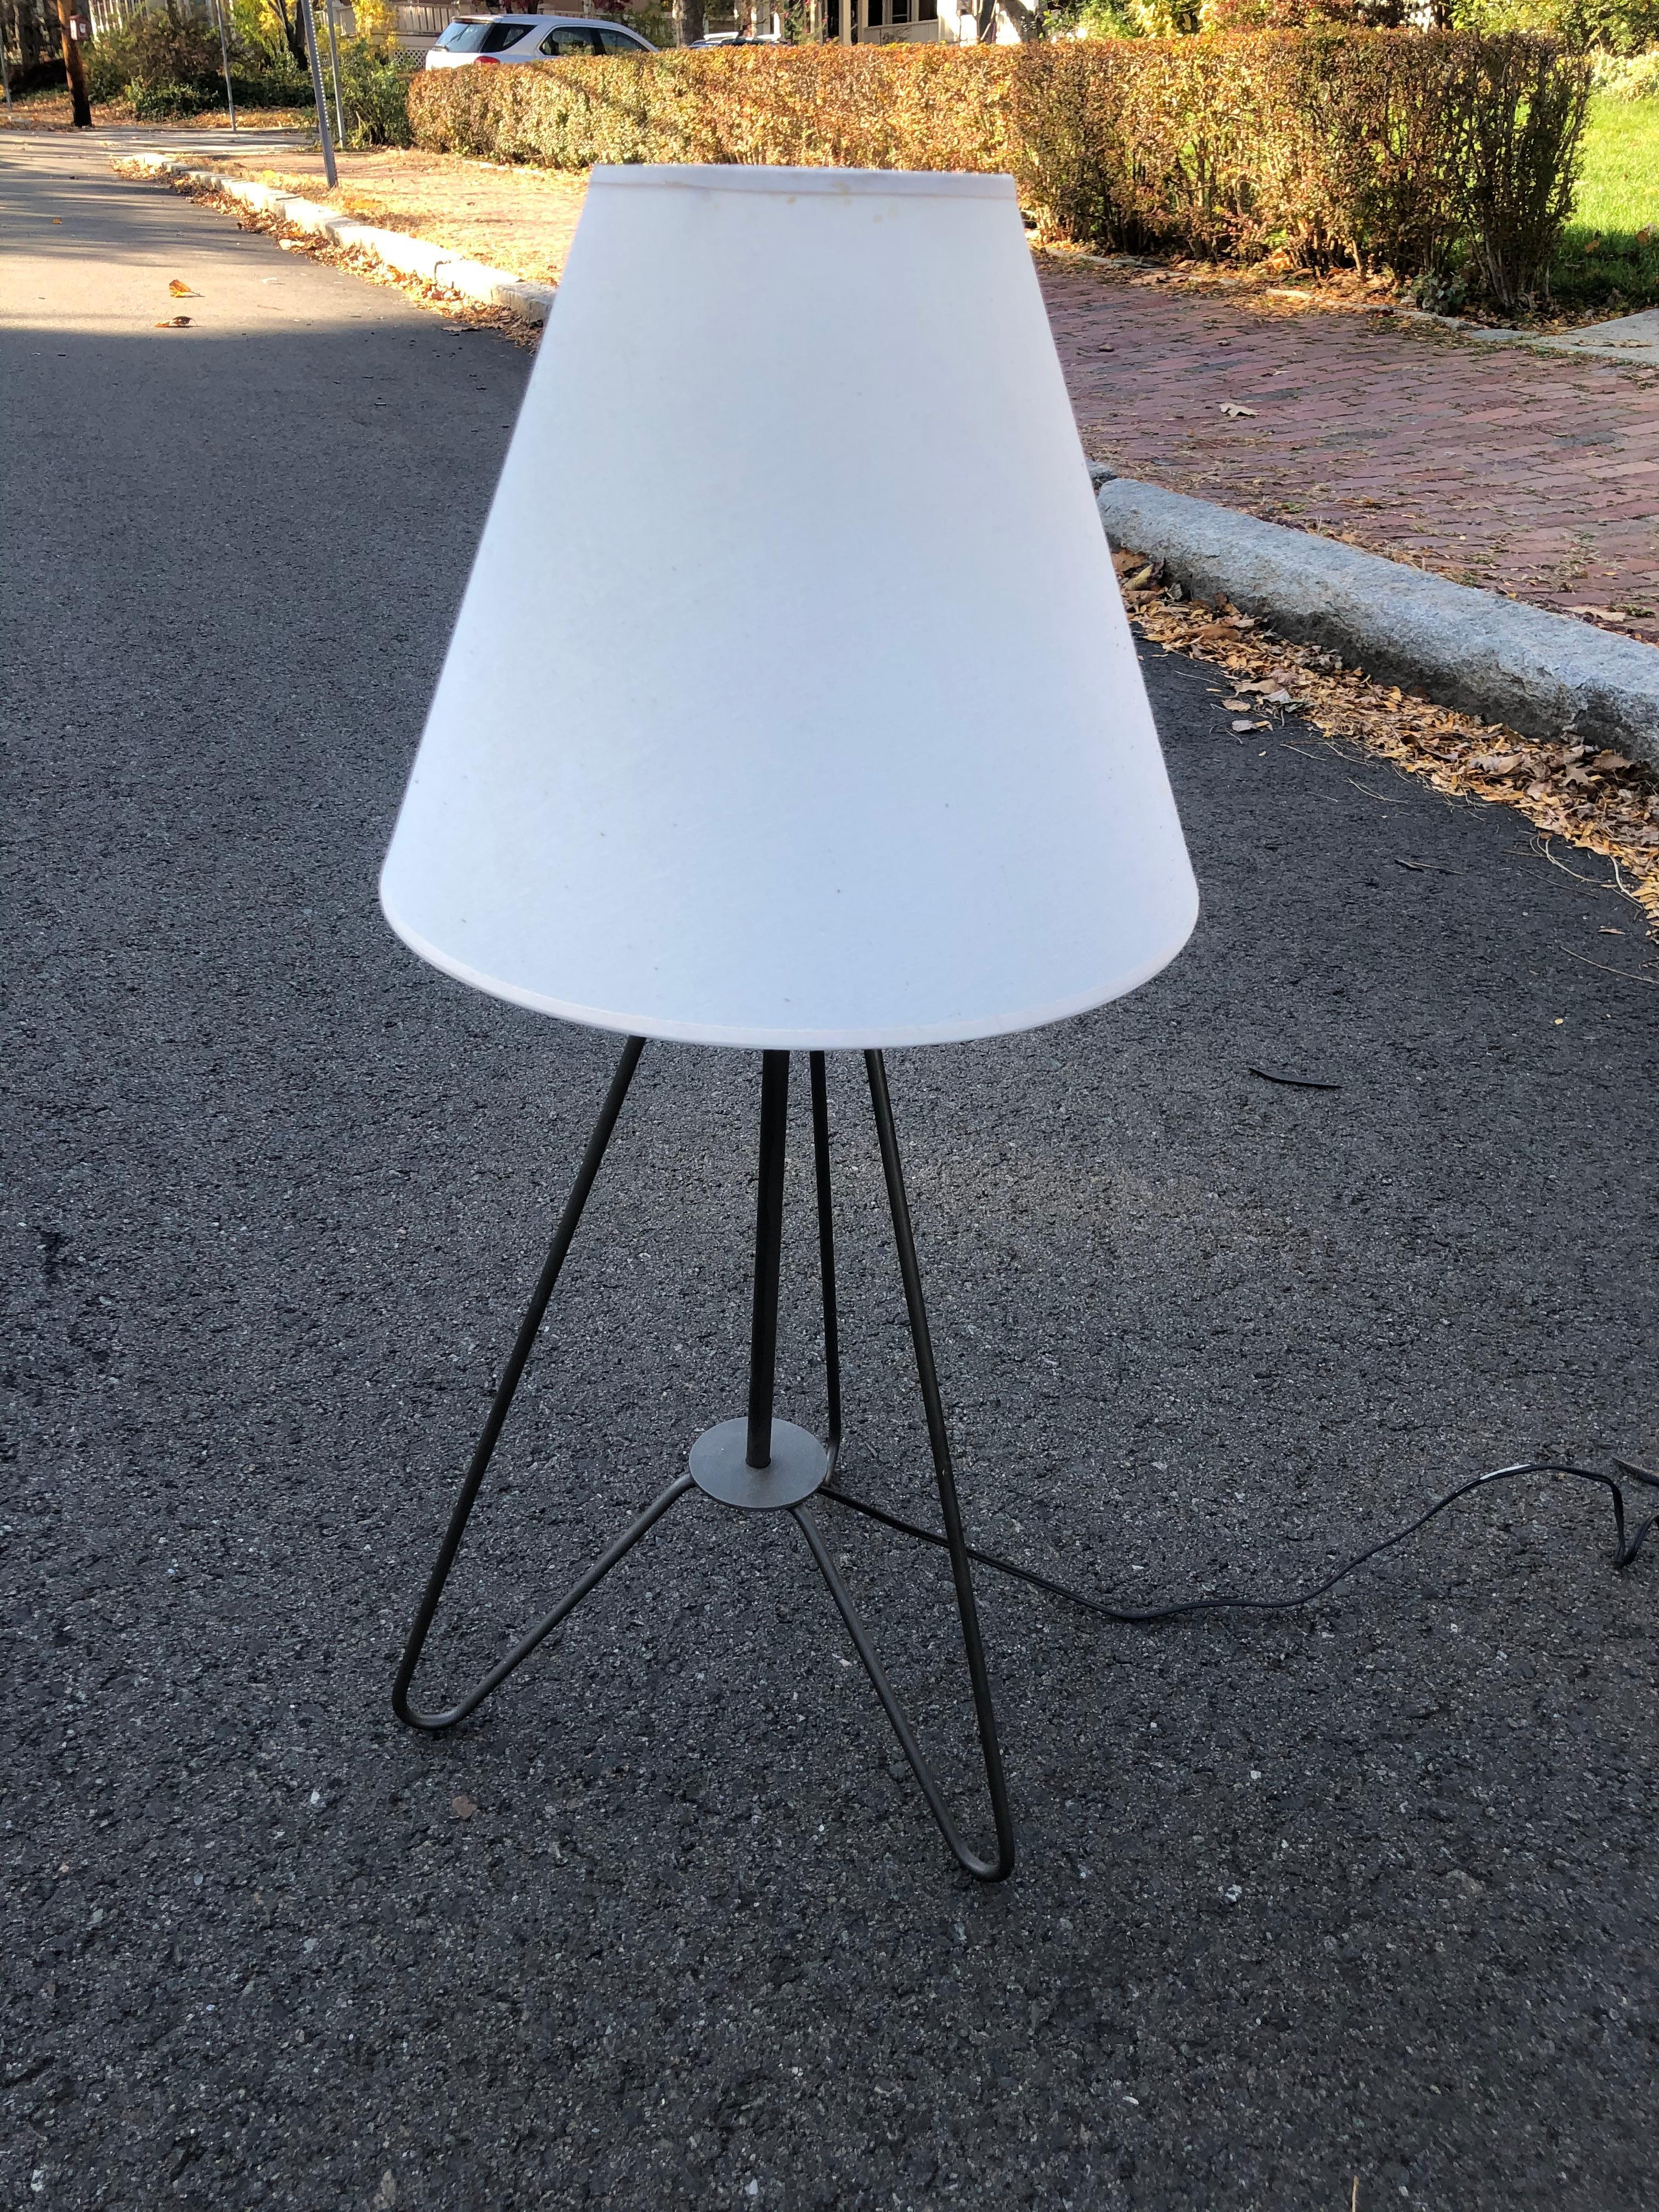 Attractive Mid-Century Modern atomic age table lamp. Industrial elegant bent metal rod frame. In good original condition. Works great.